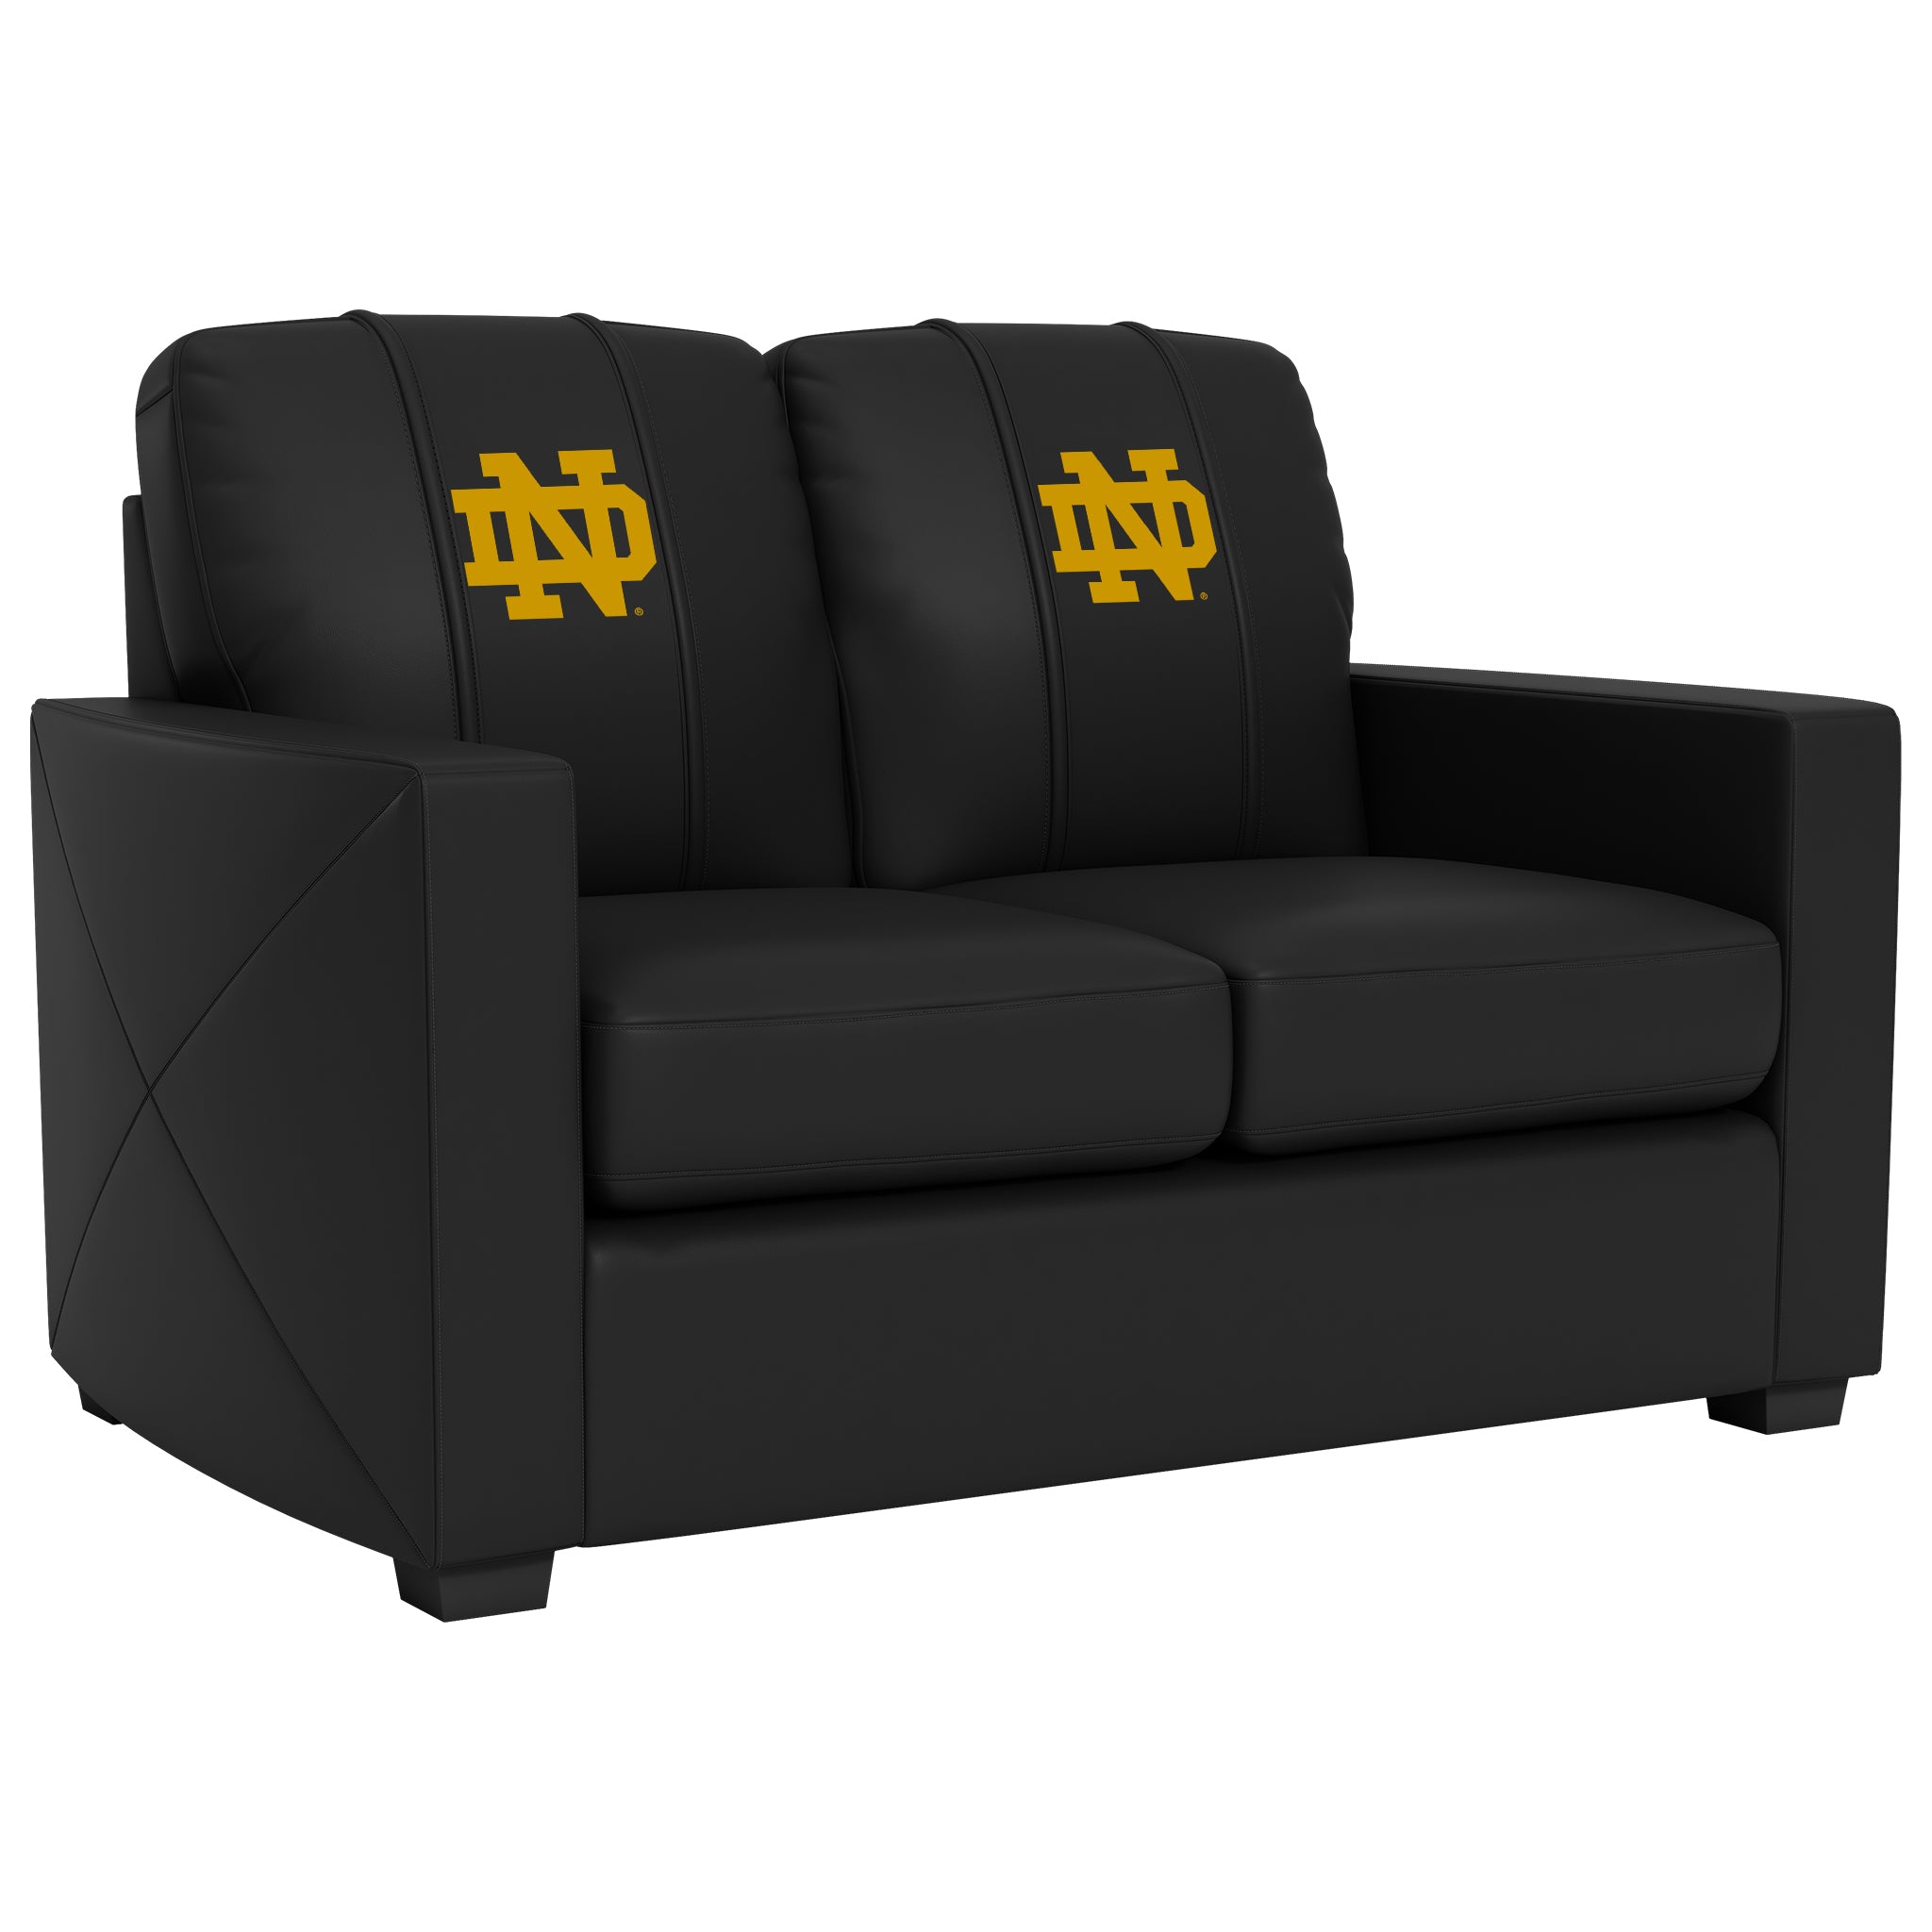 Notre Dame  Silver Loveseat with Notre Dame Primary Logo